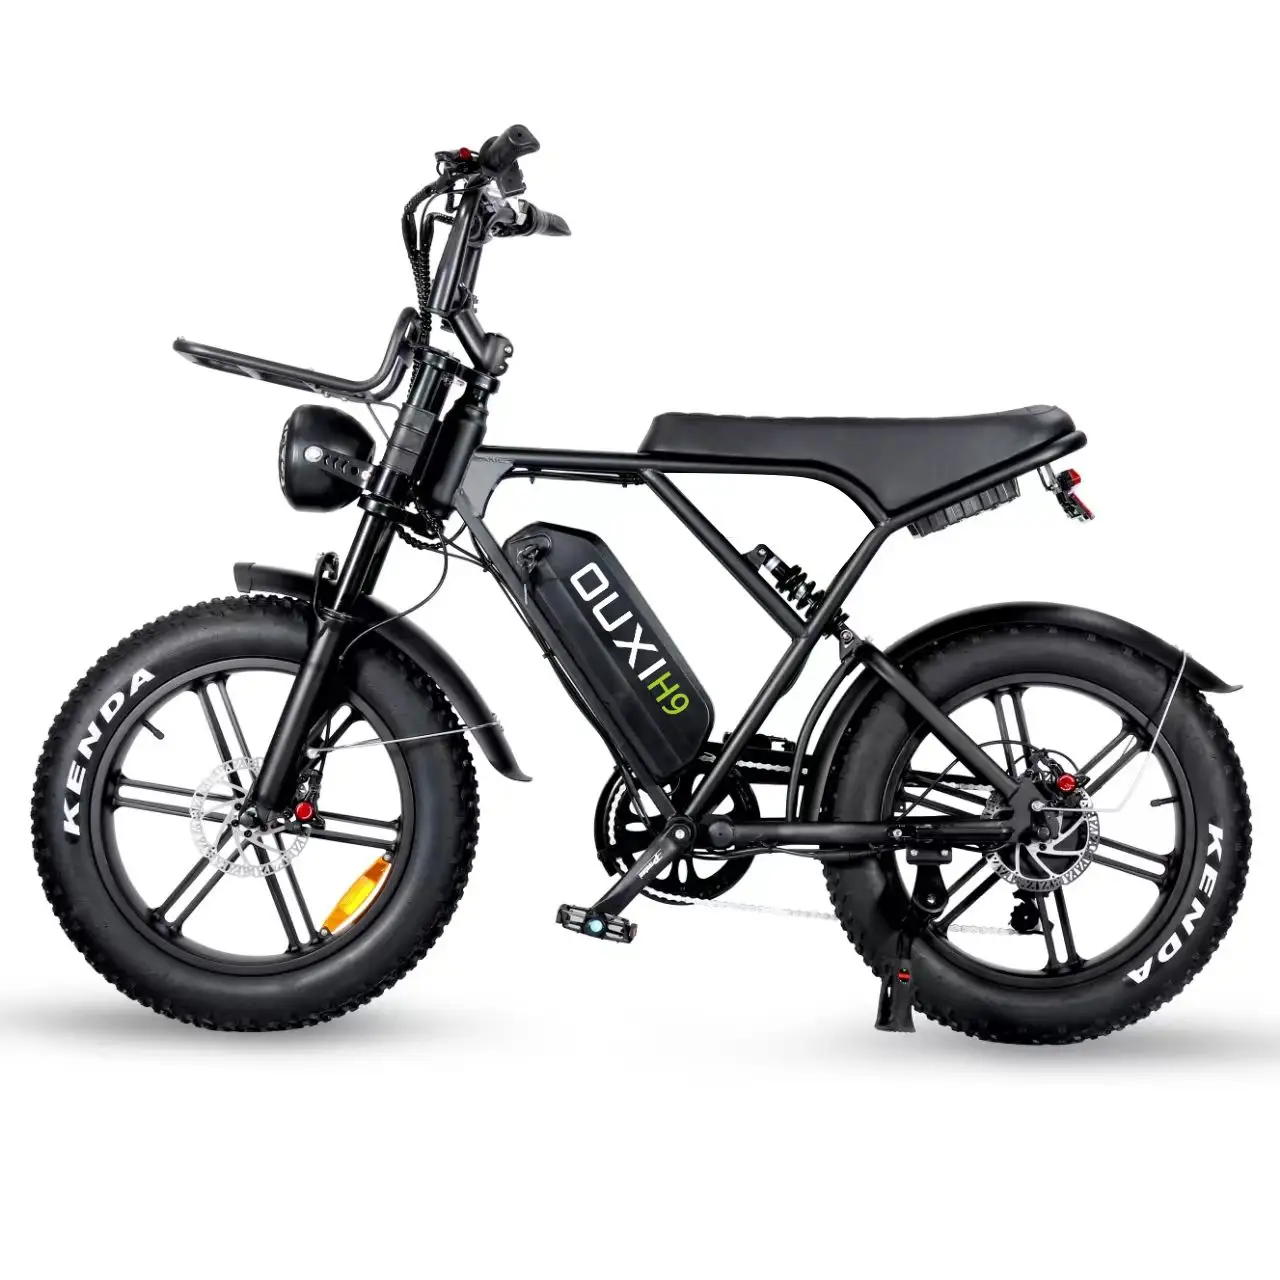 Make your cycling experience thrilling with an electric bike